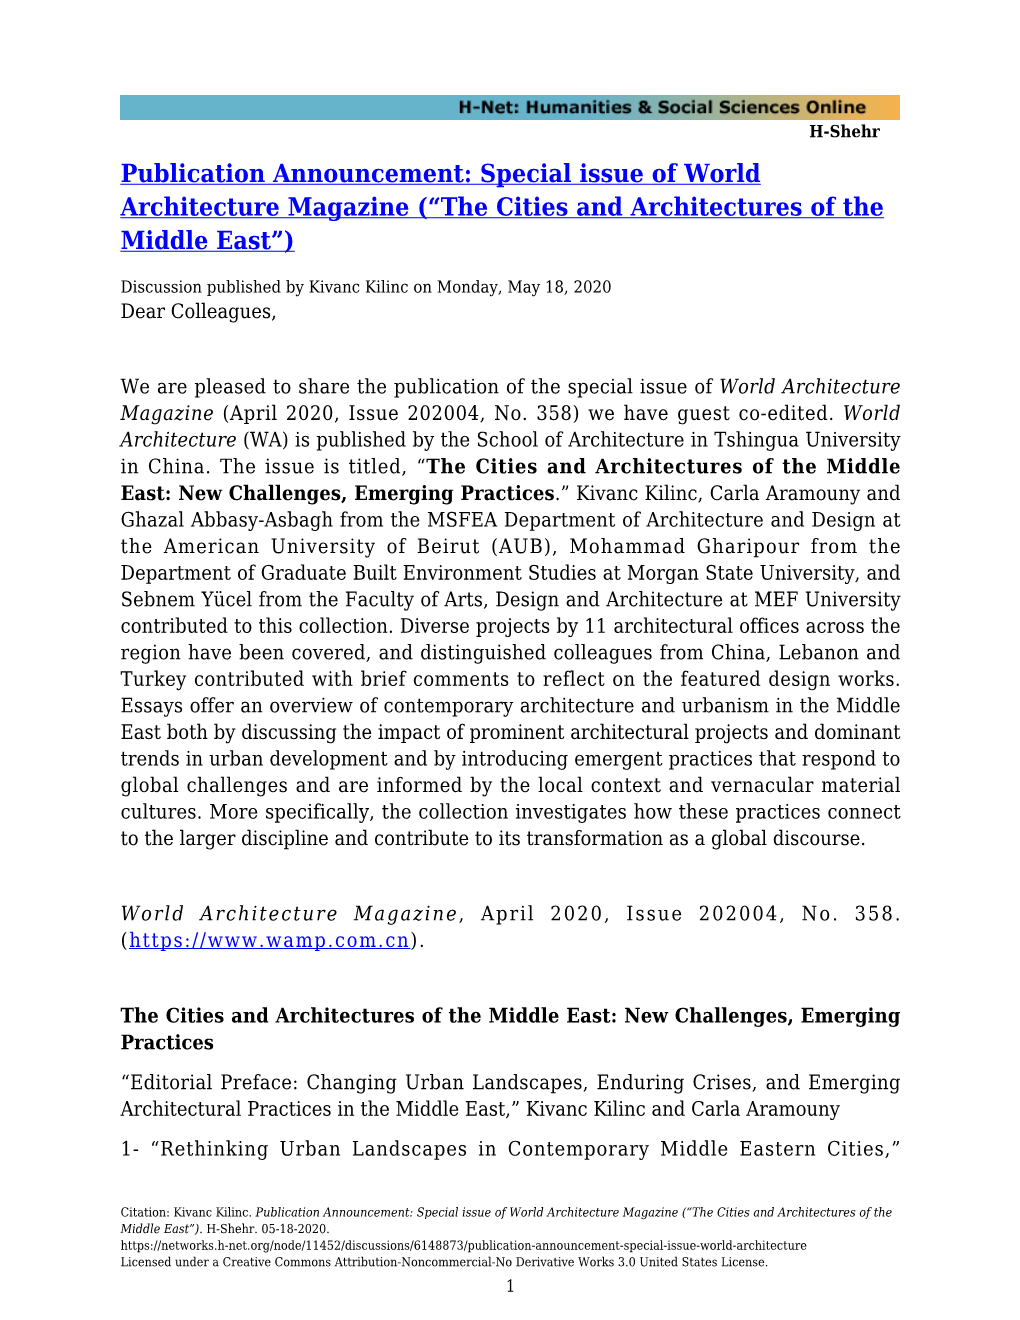 Publication Announcement: Special Issue of World Architecture Magazine (“The Cities and Architectures of the Middle East”)